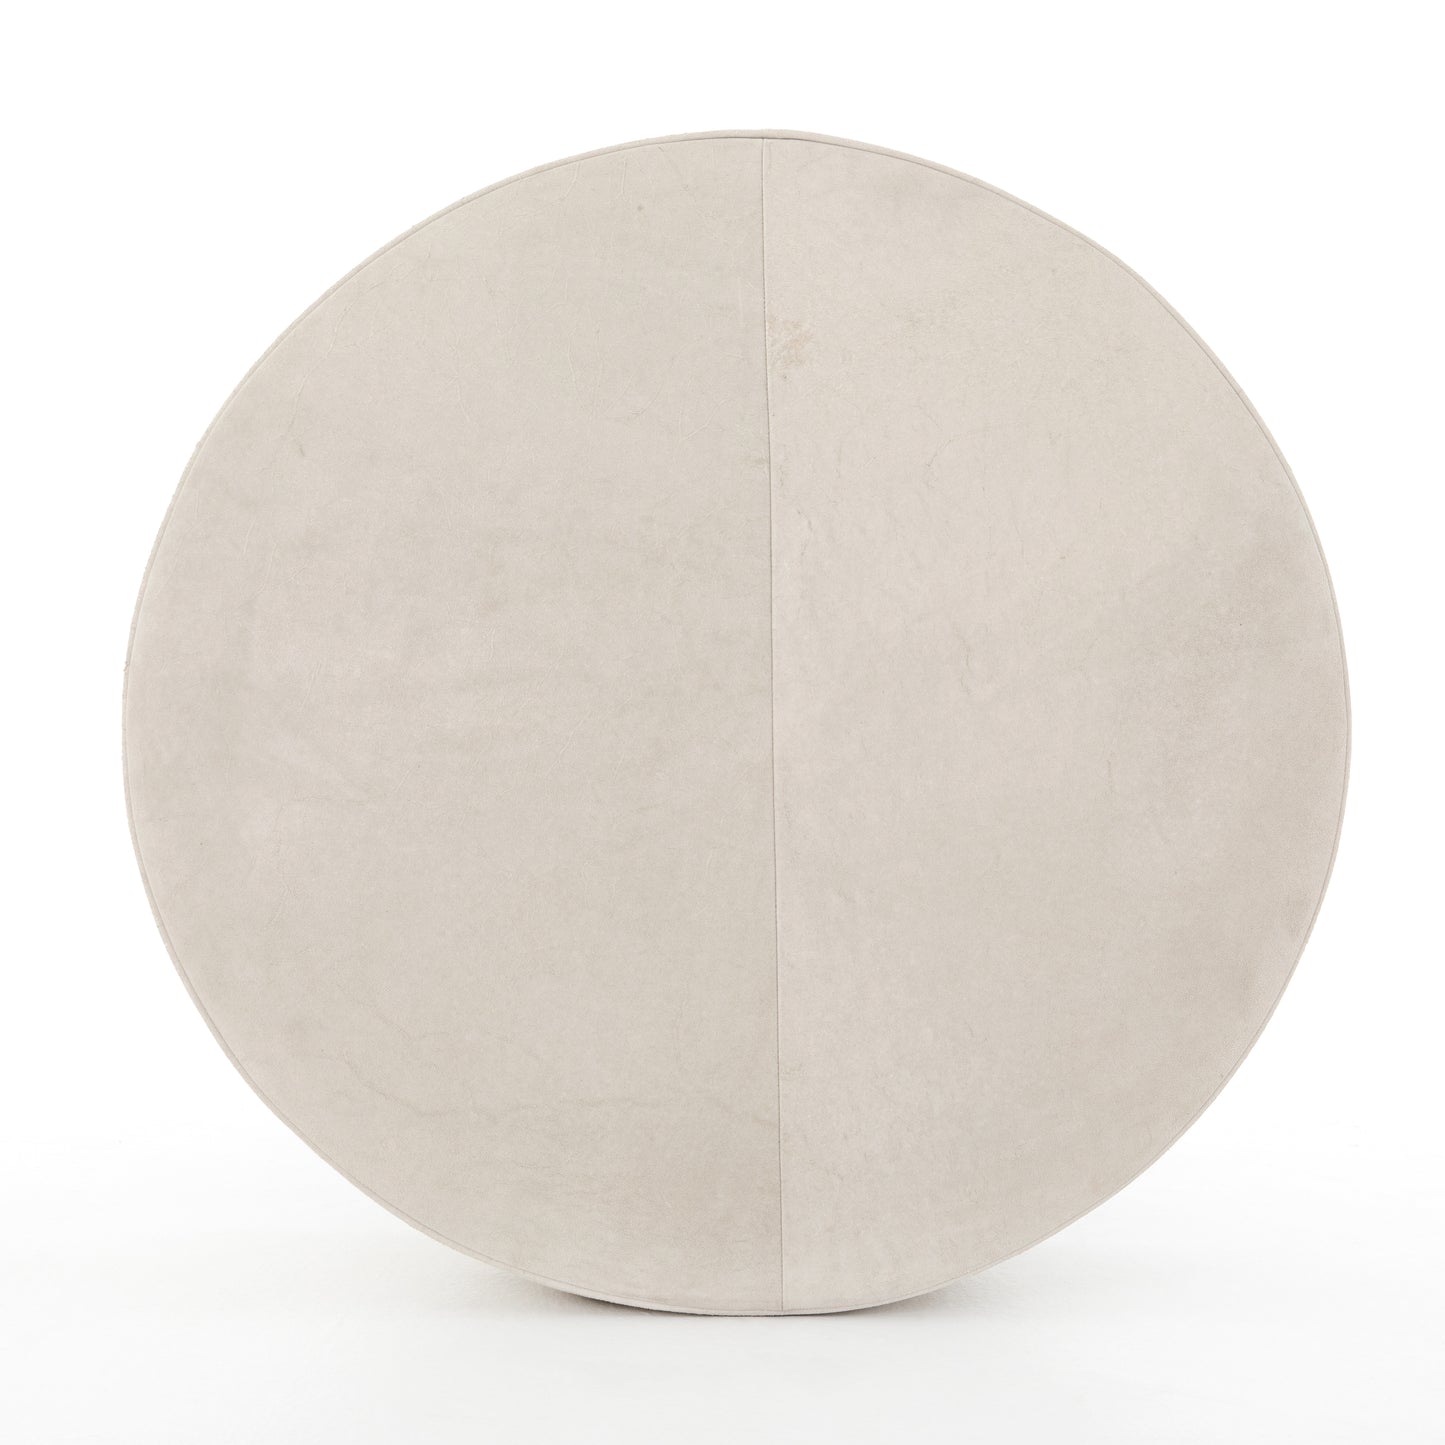 Sinclair Large Round Ottoman-Oyster